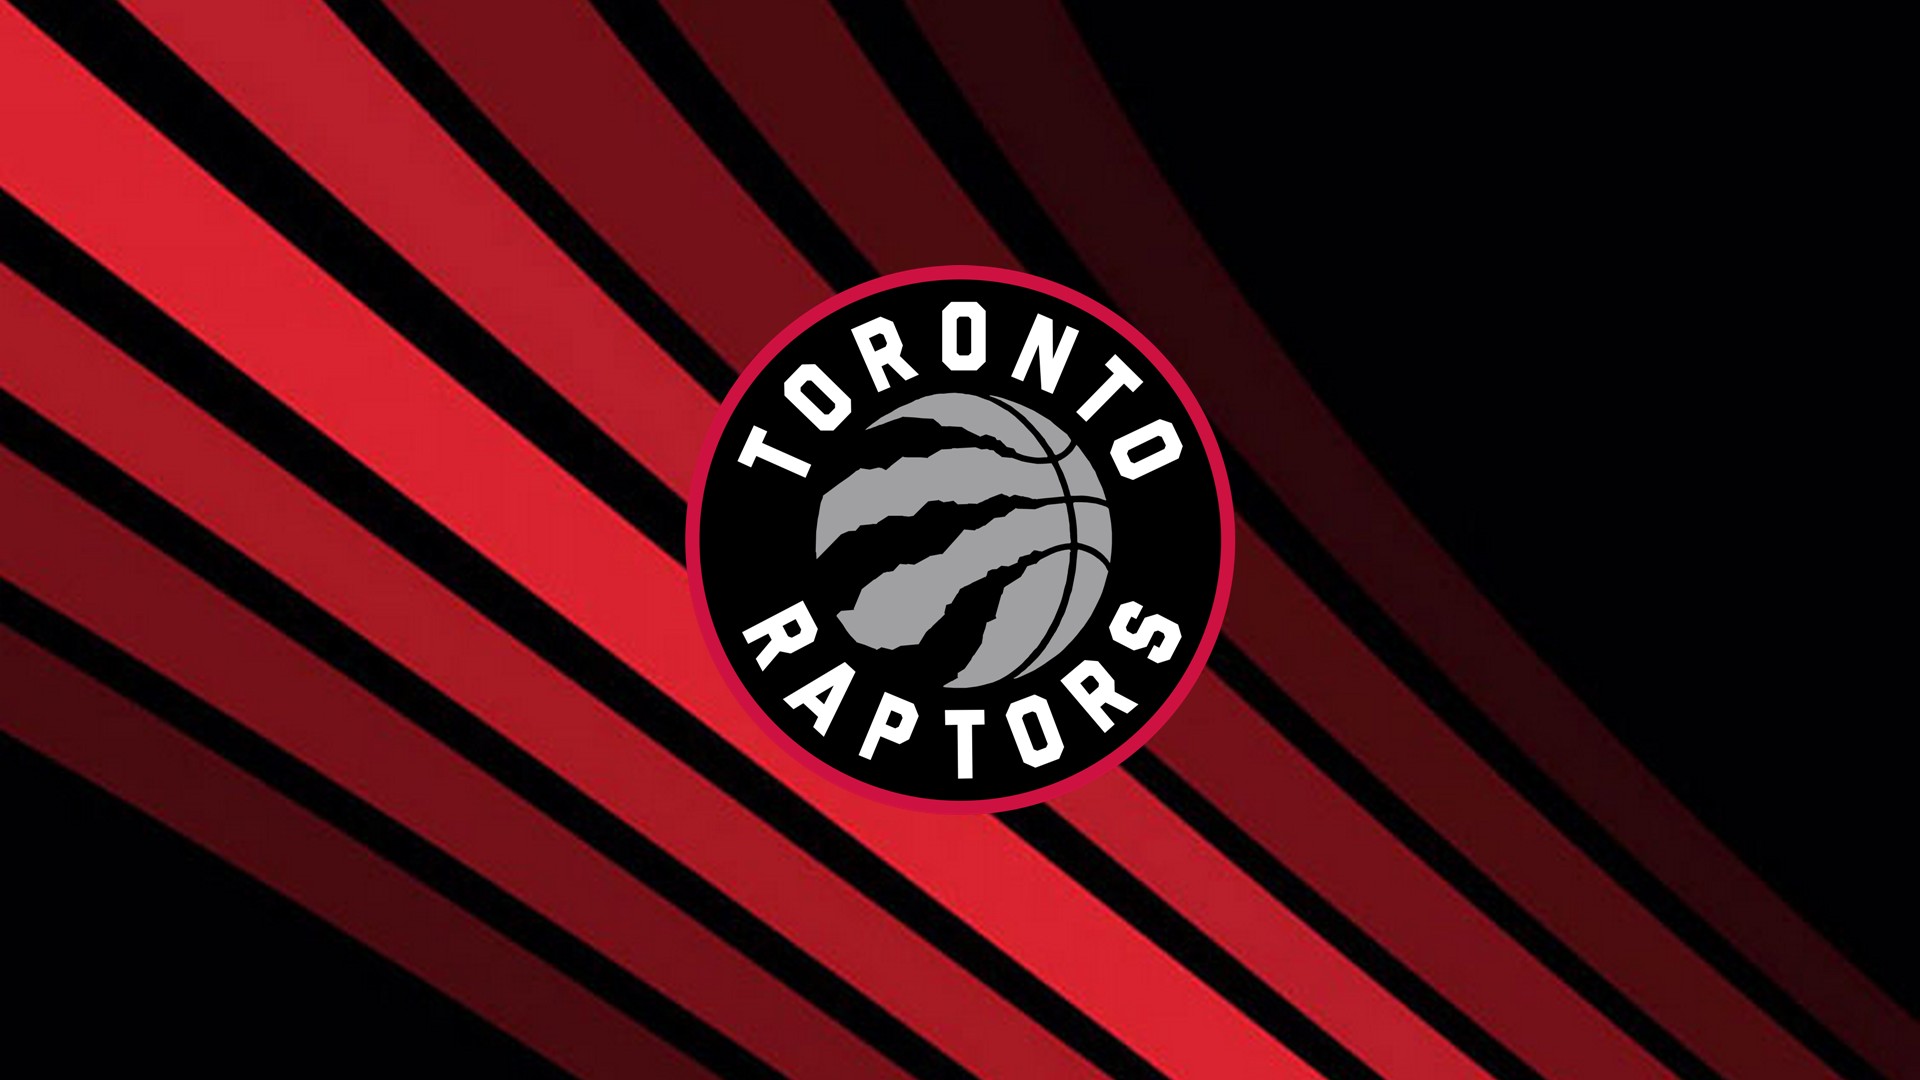 Toronto Raptors Wallpaper HD Pictures with image dimensions 1920x1080 pixel. You can make this wallpaper for your Desktop Computer Backgrounds, Windows or Mac Screensavers, iPhone Lock screen, Tablet or Android and another Mobile Phone device